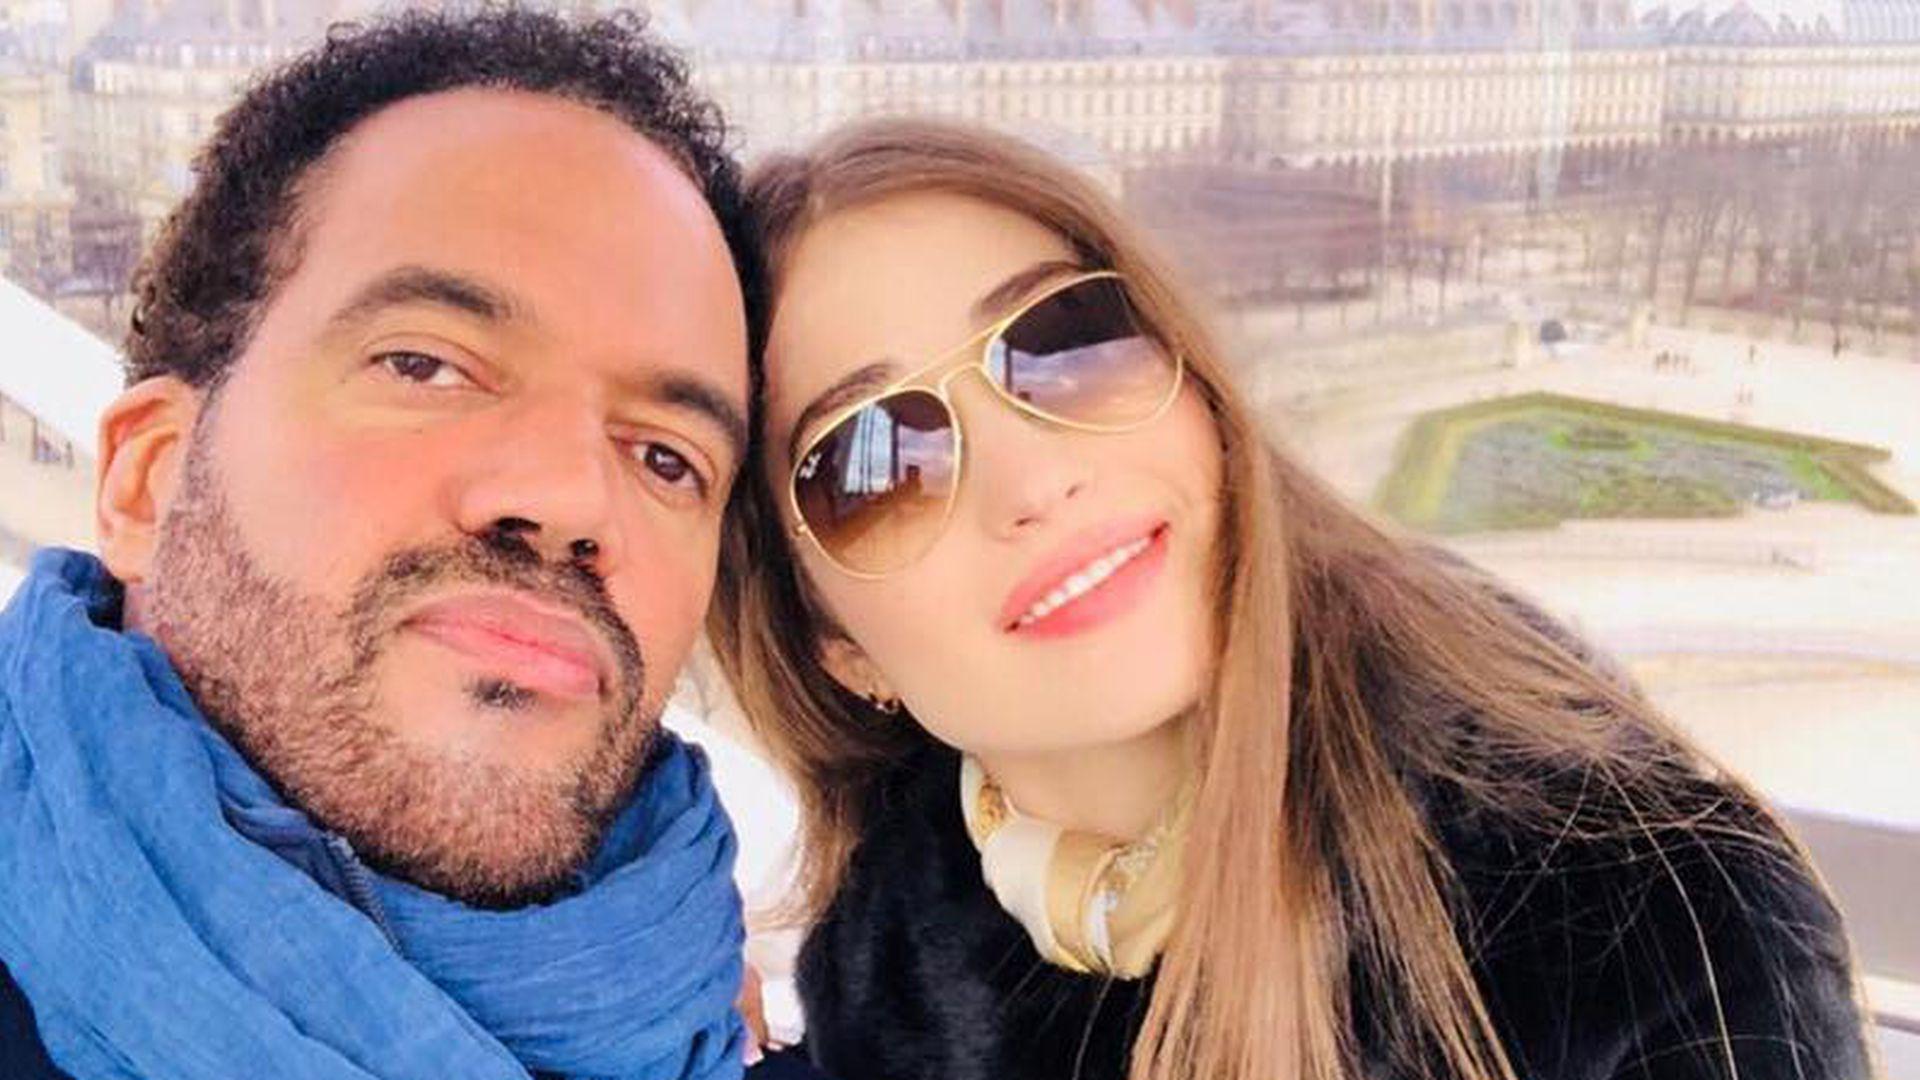 Kristoff St John's fiancé may not come to the funeral